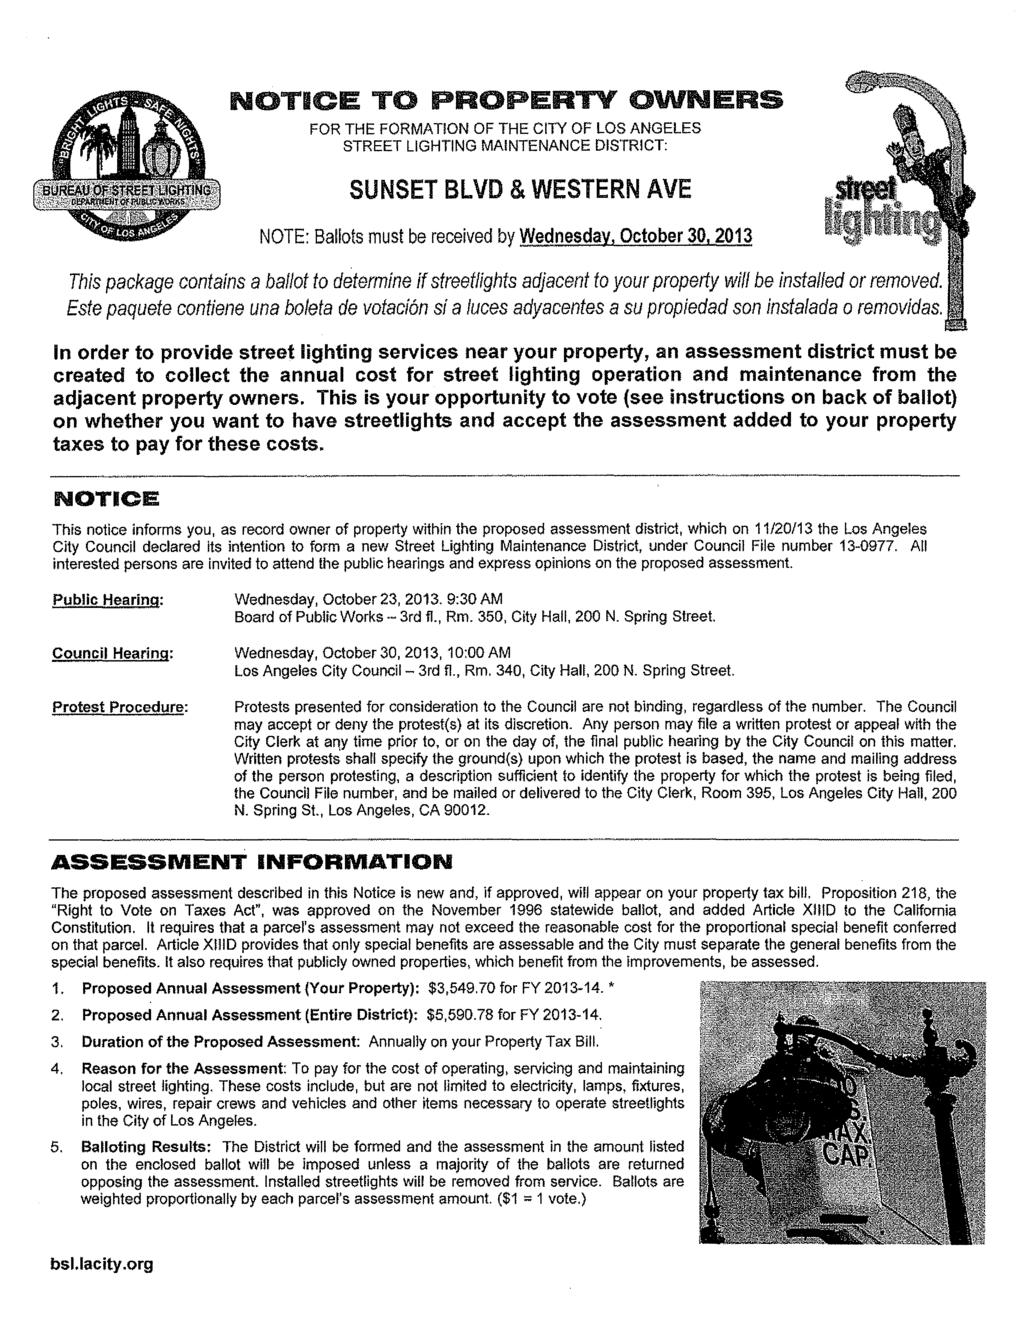 NOTICE TO PROPERTY OWNERS FOR THE FORMATION OF THE CITY OF LOS ANGELES STREET LIGHTING MAINTENANCE DISTRICT: SUNSET BLVD & WESTERN AVE NOTE: Ballots must be received by Wednesday, October 30,2013